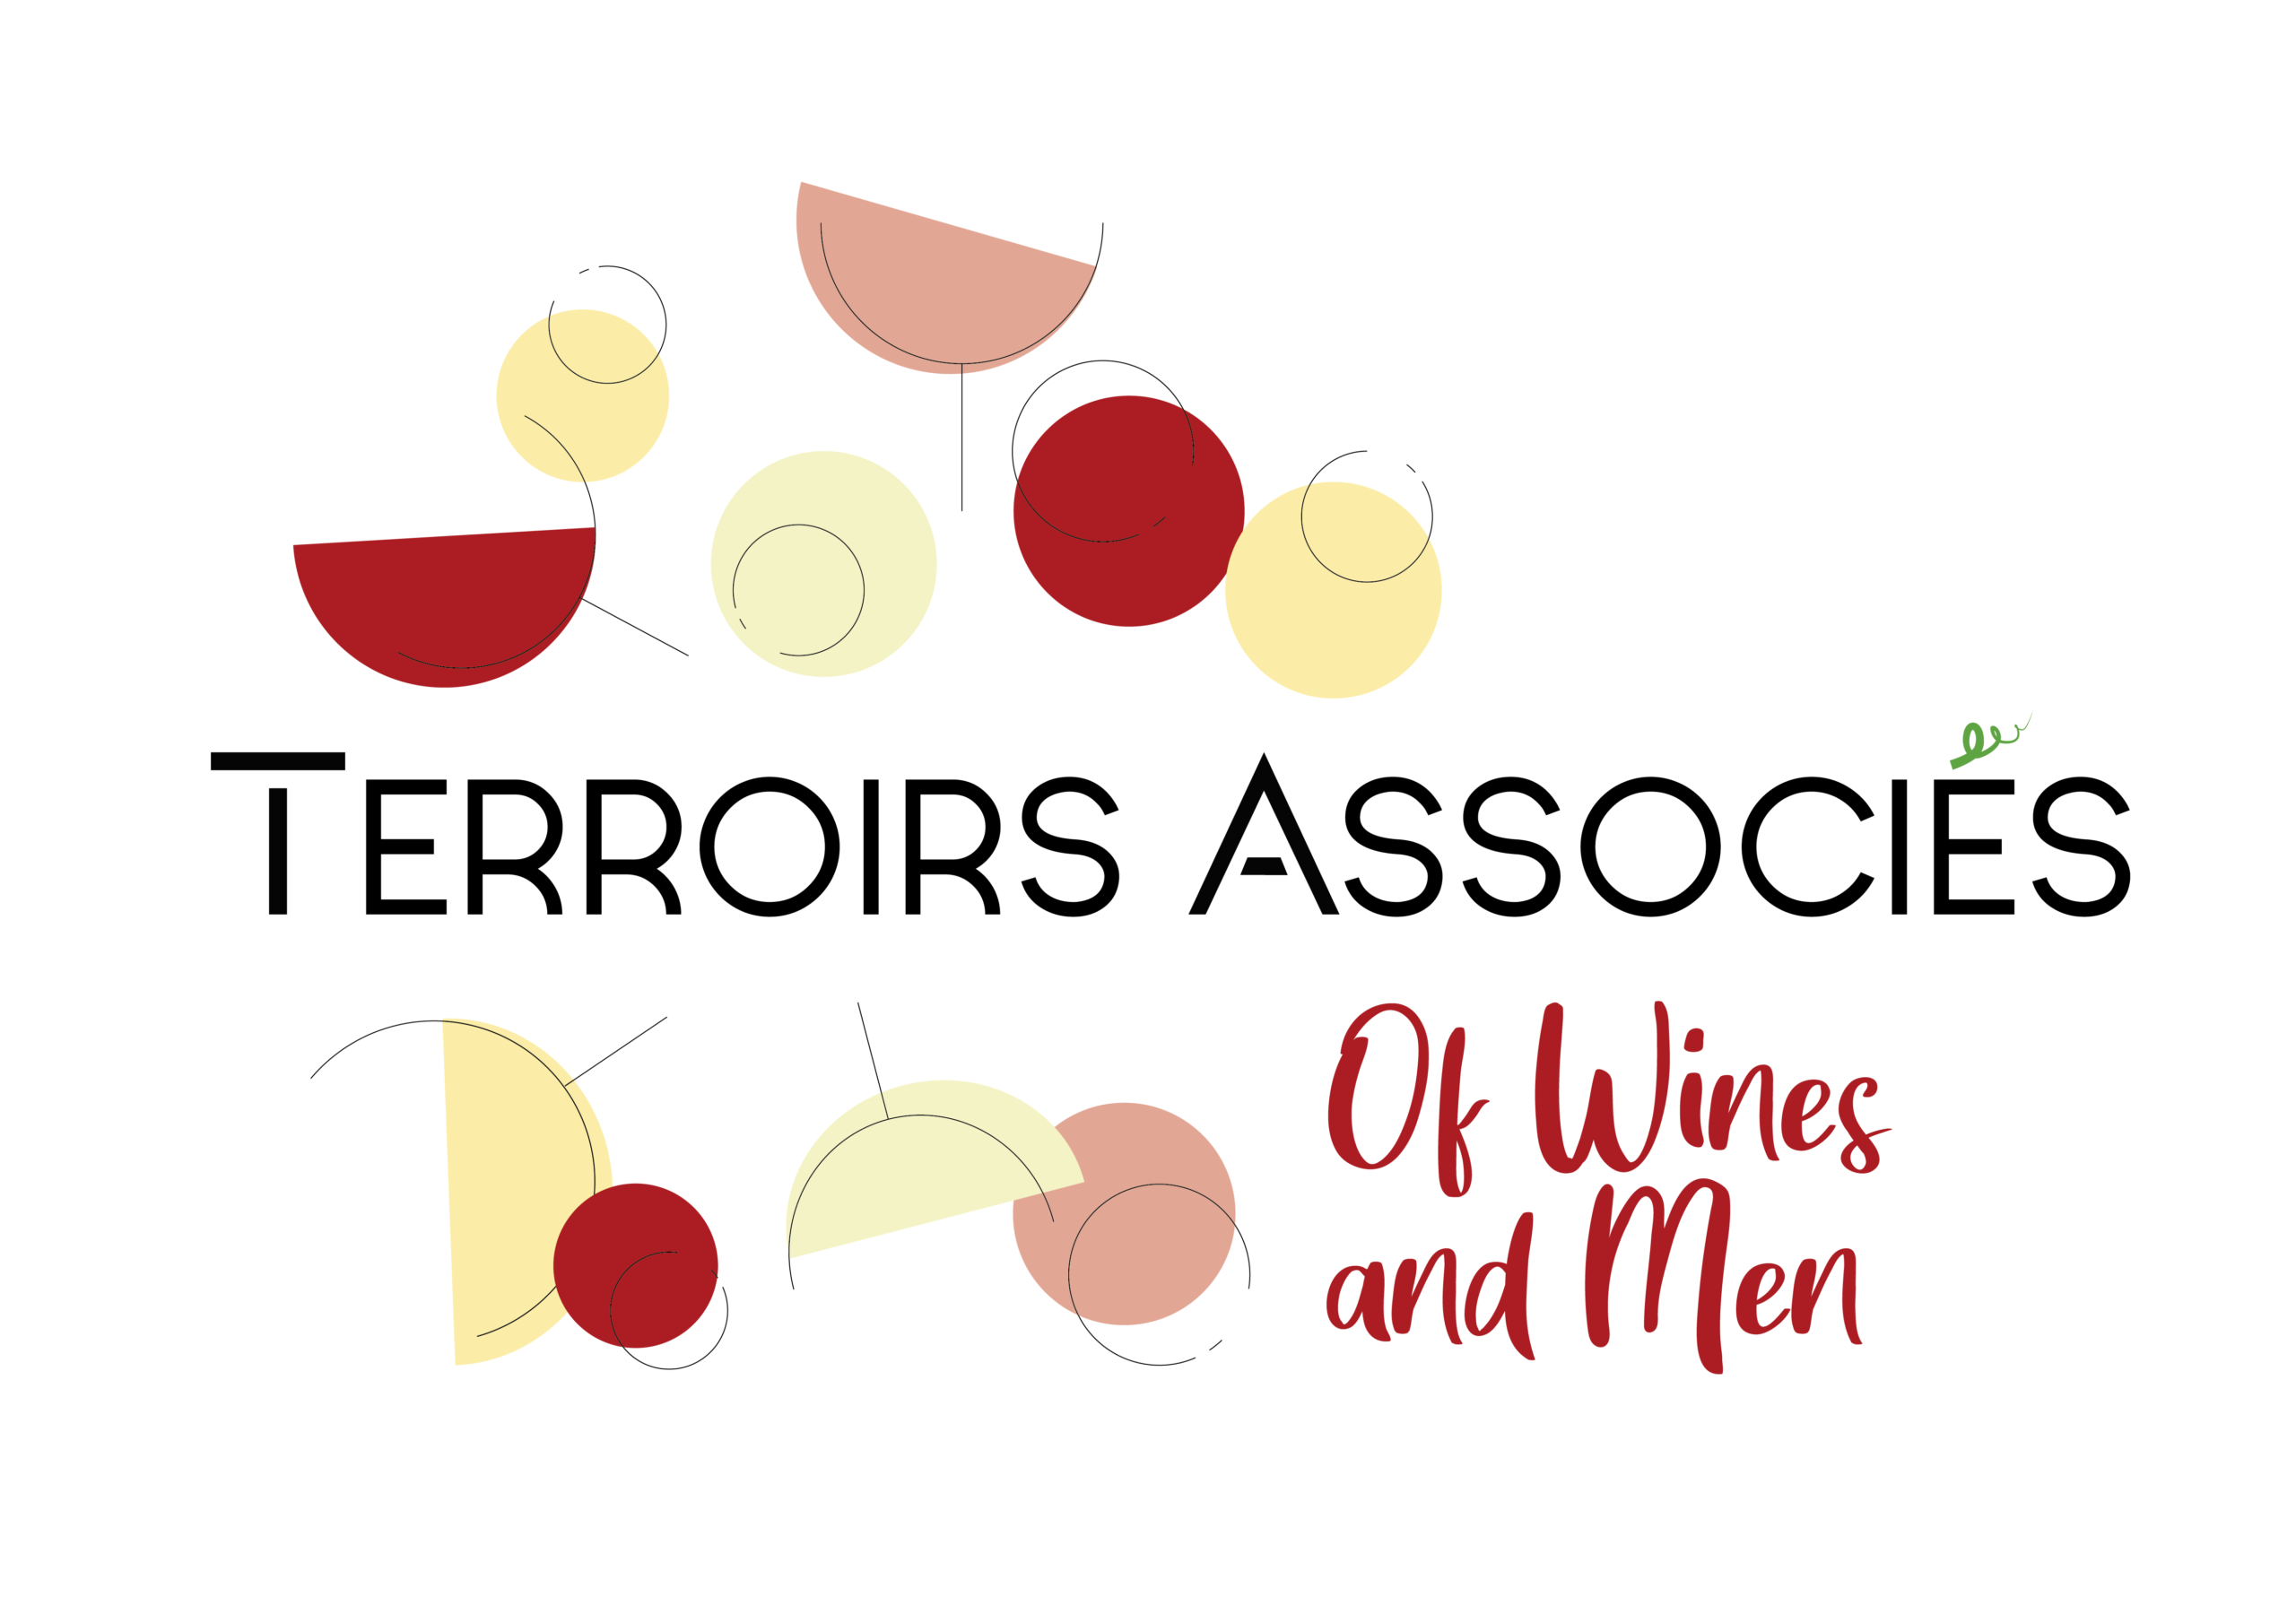 terroirs associés - of wine and men